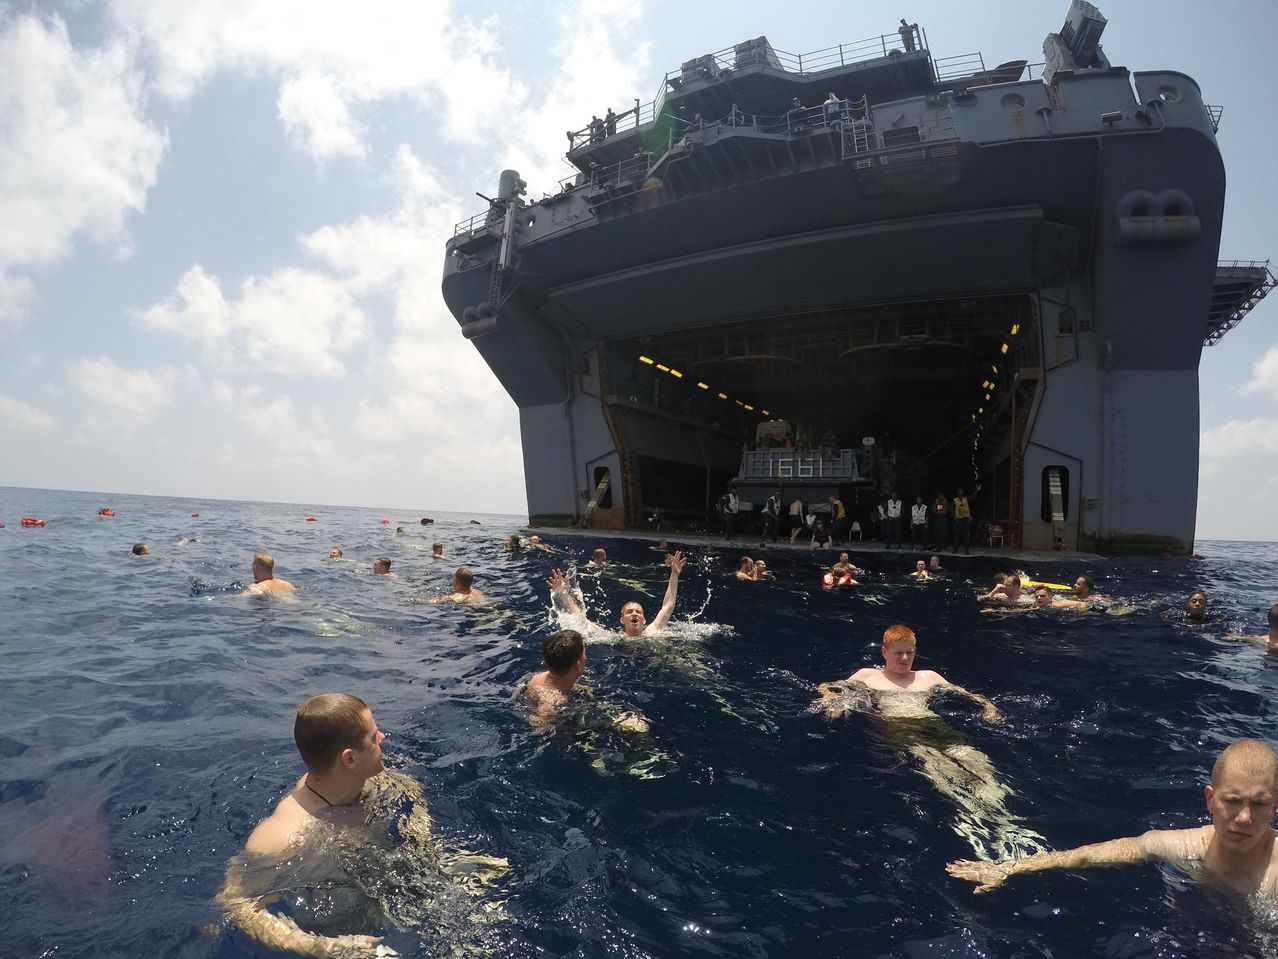 Soldiers from the USS Iwo Jima taking a dip in the Gulf of Aden during a break